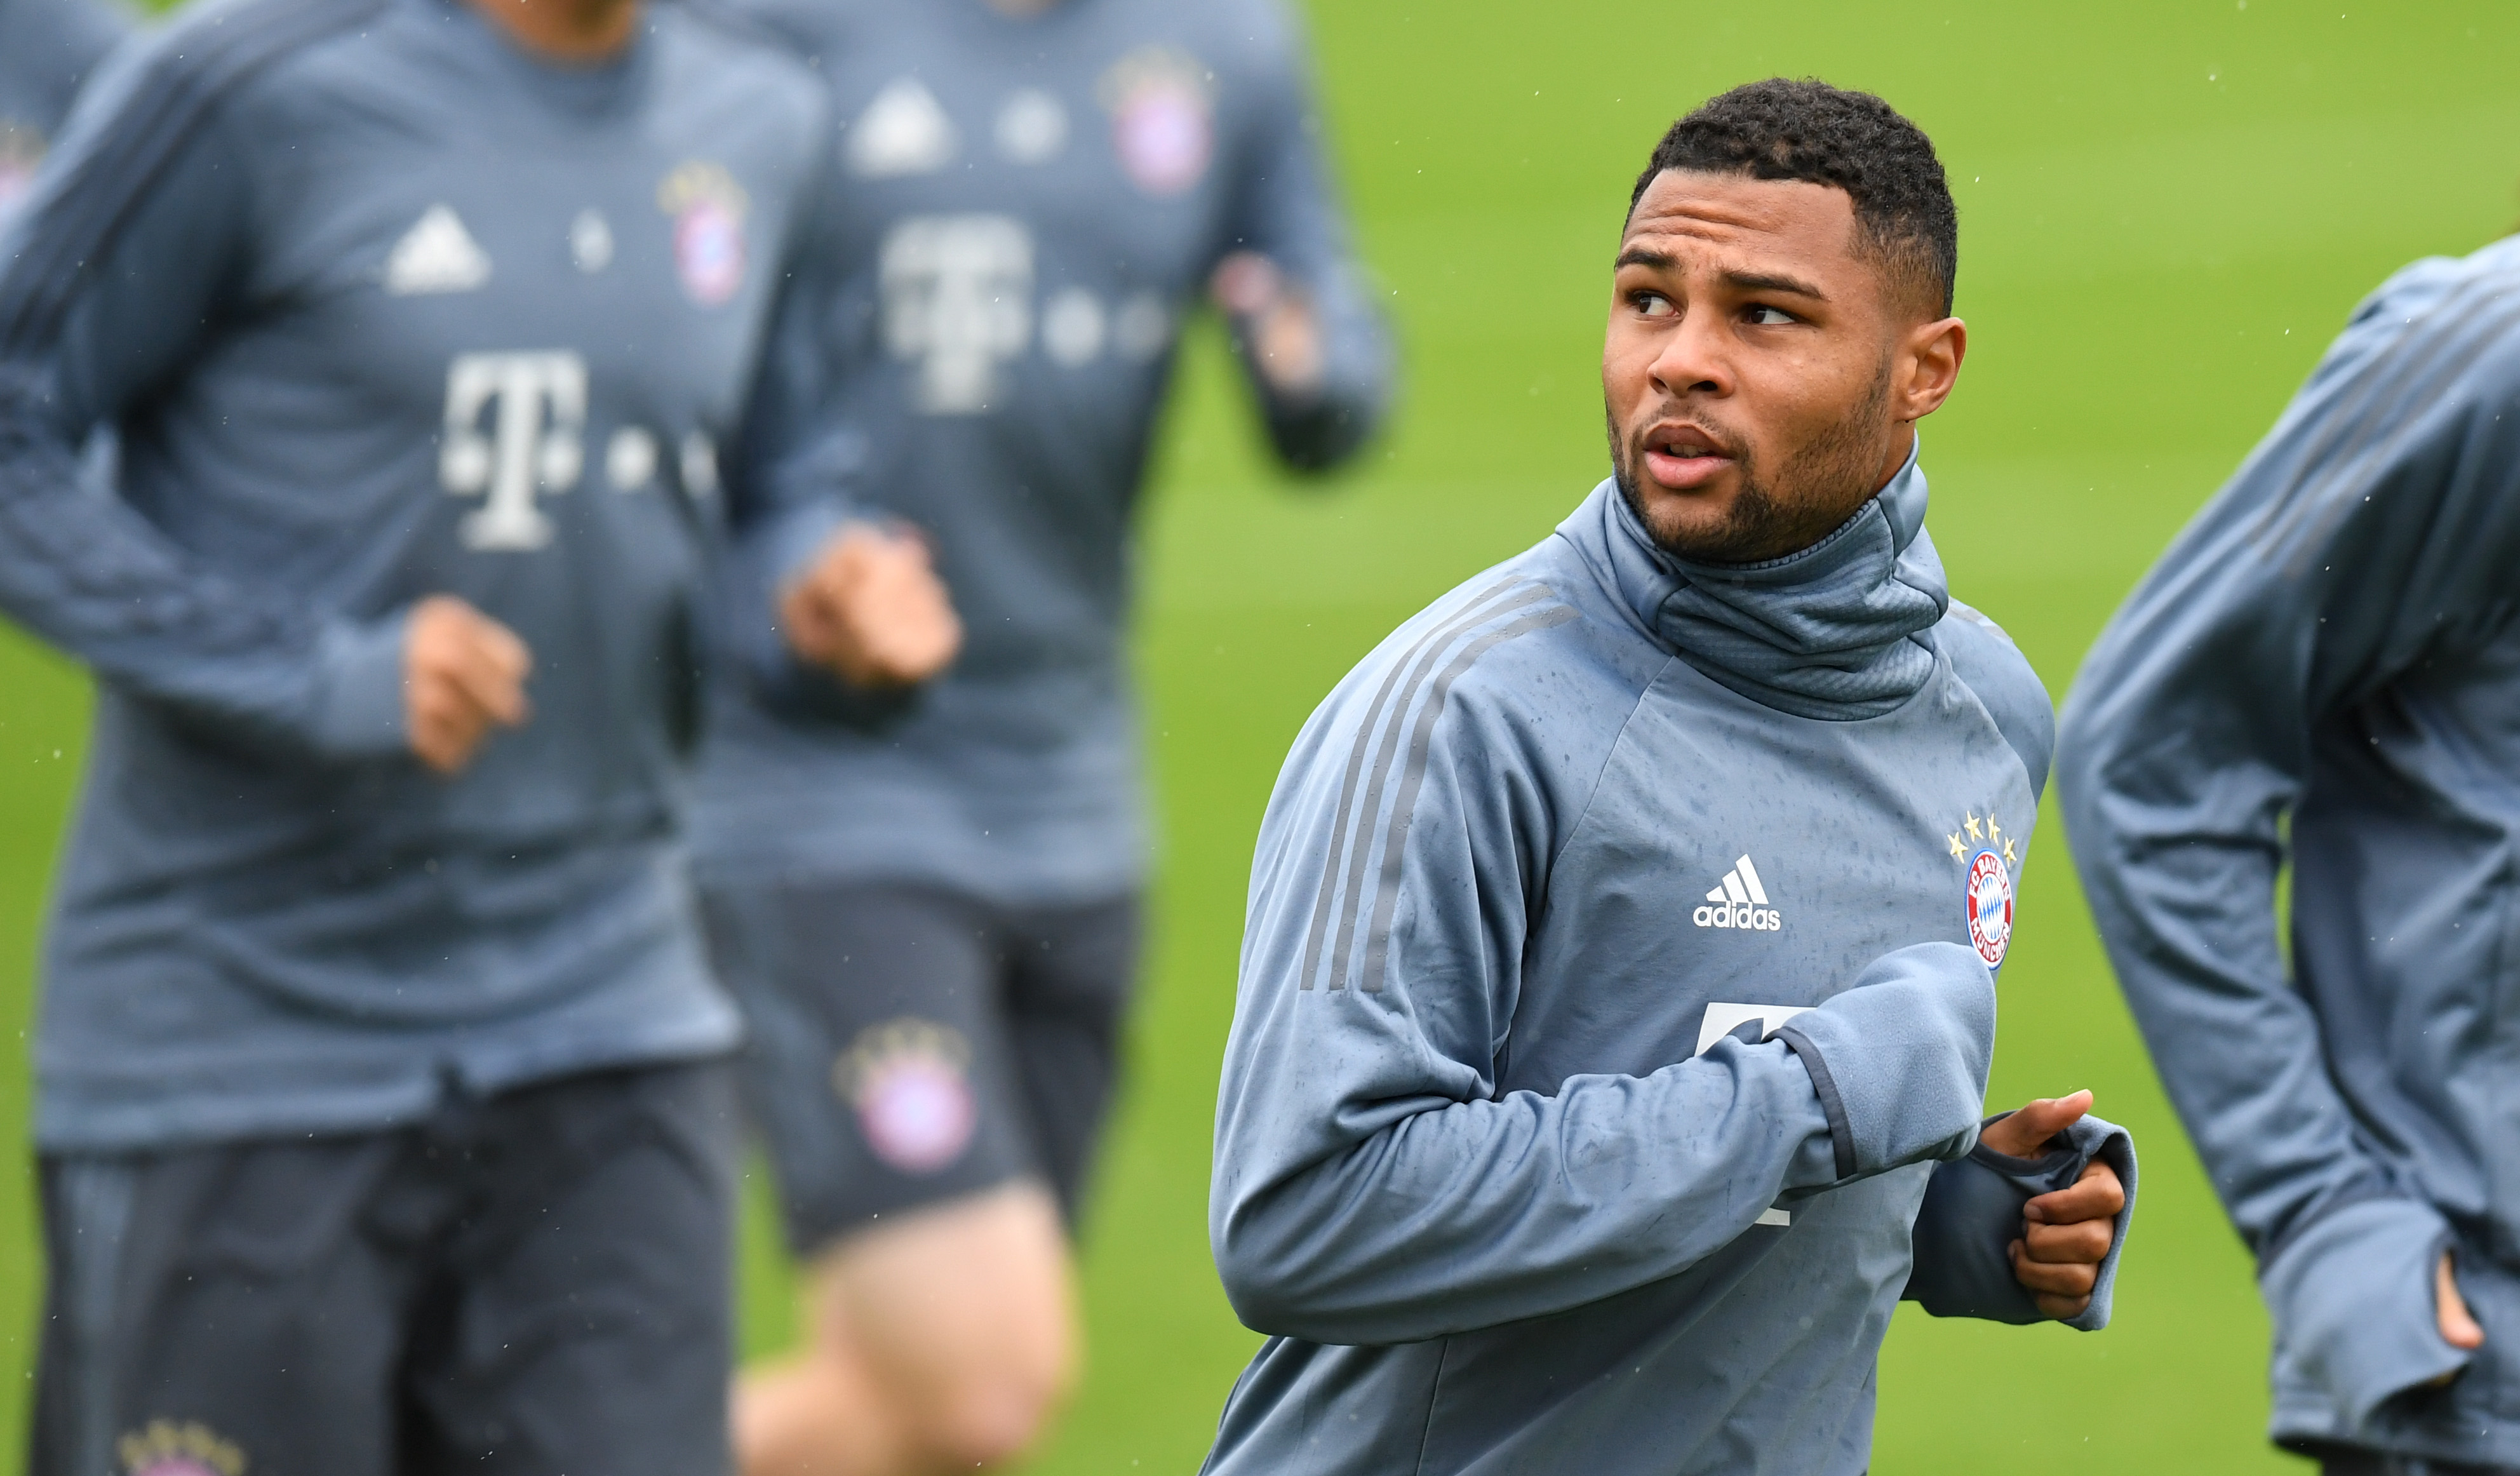 Can Gnabry seize his opportunity? (Photo by Christof STACHE / AFP)